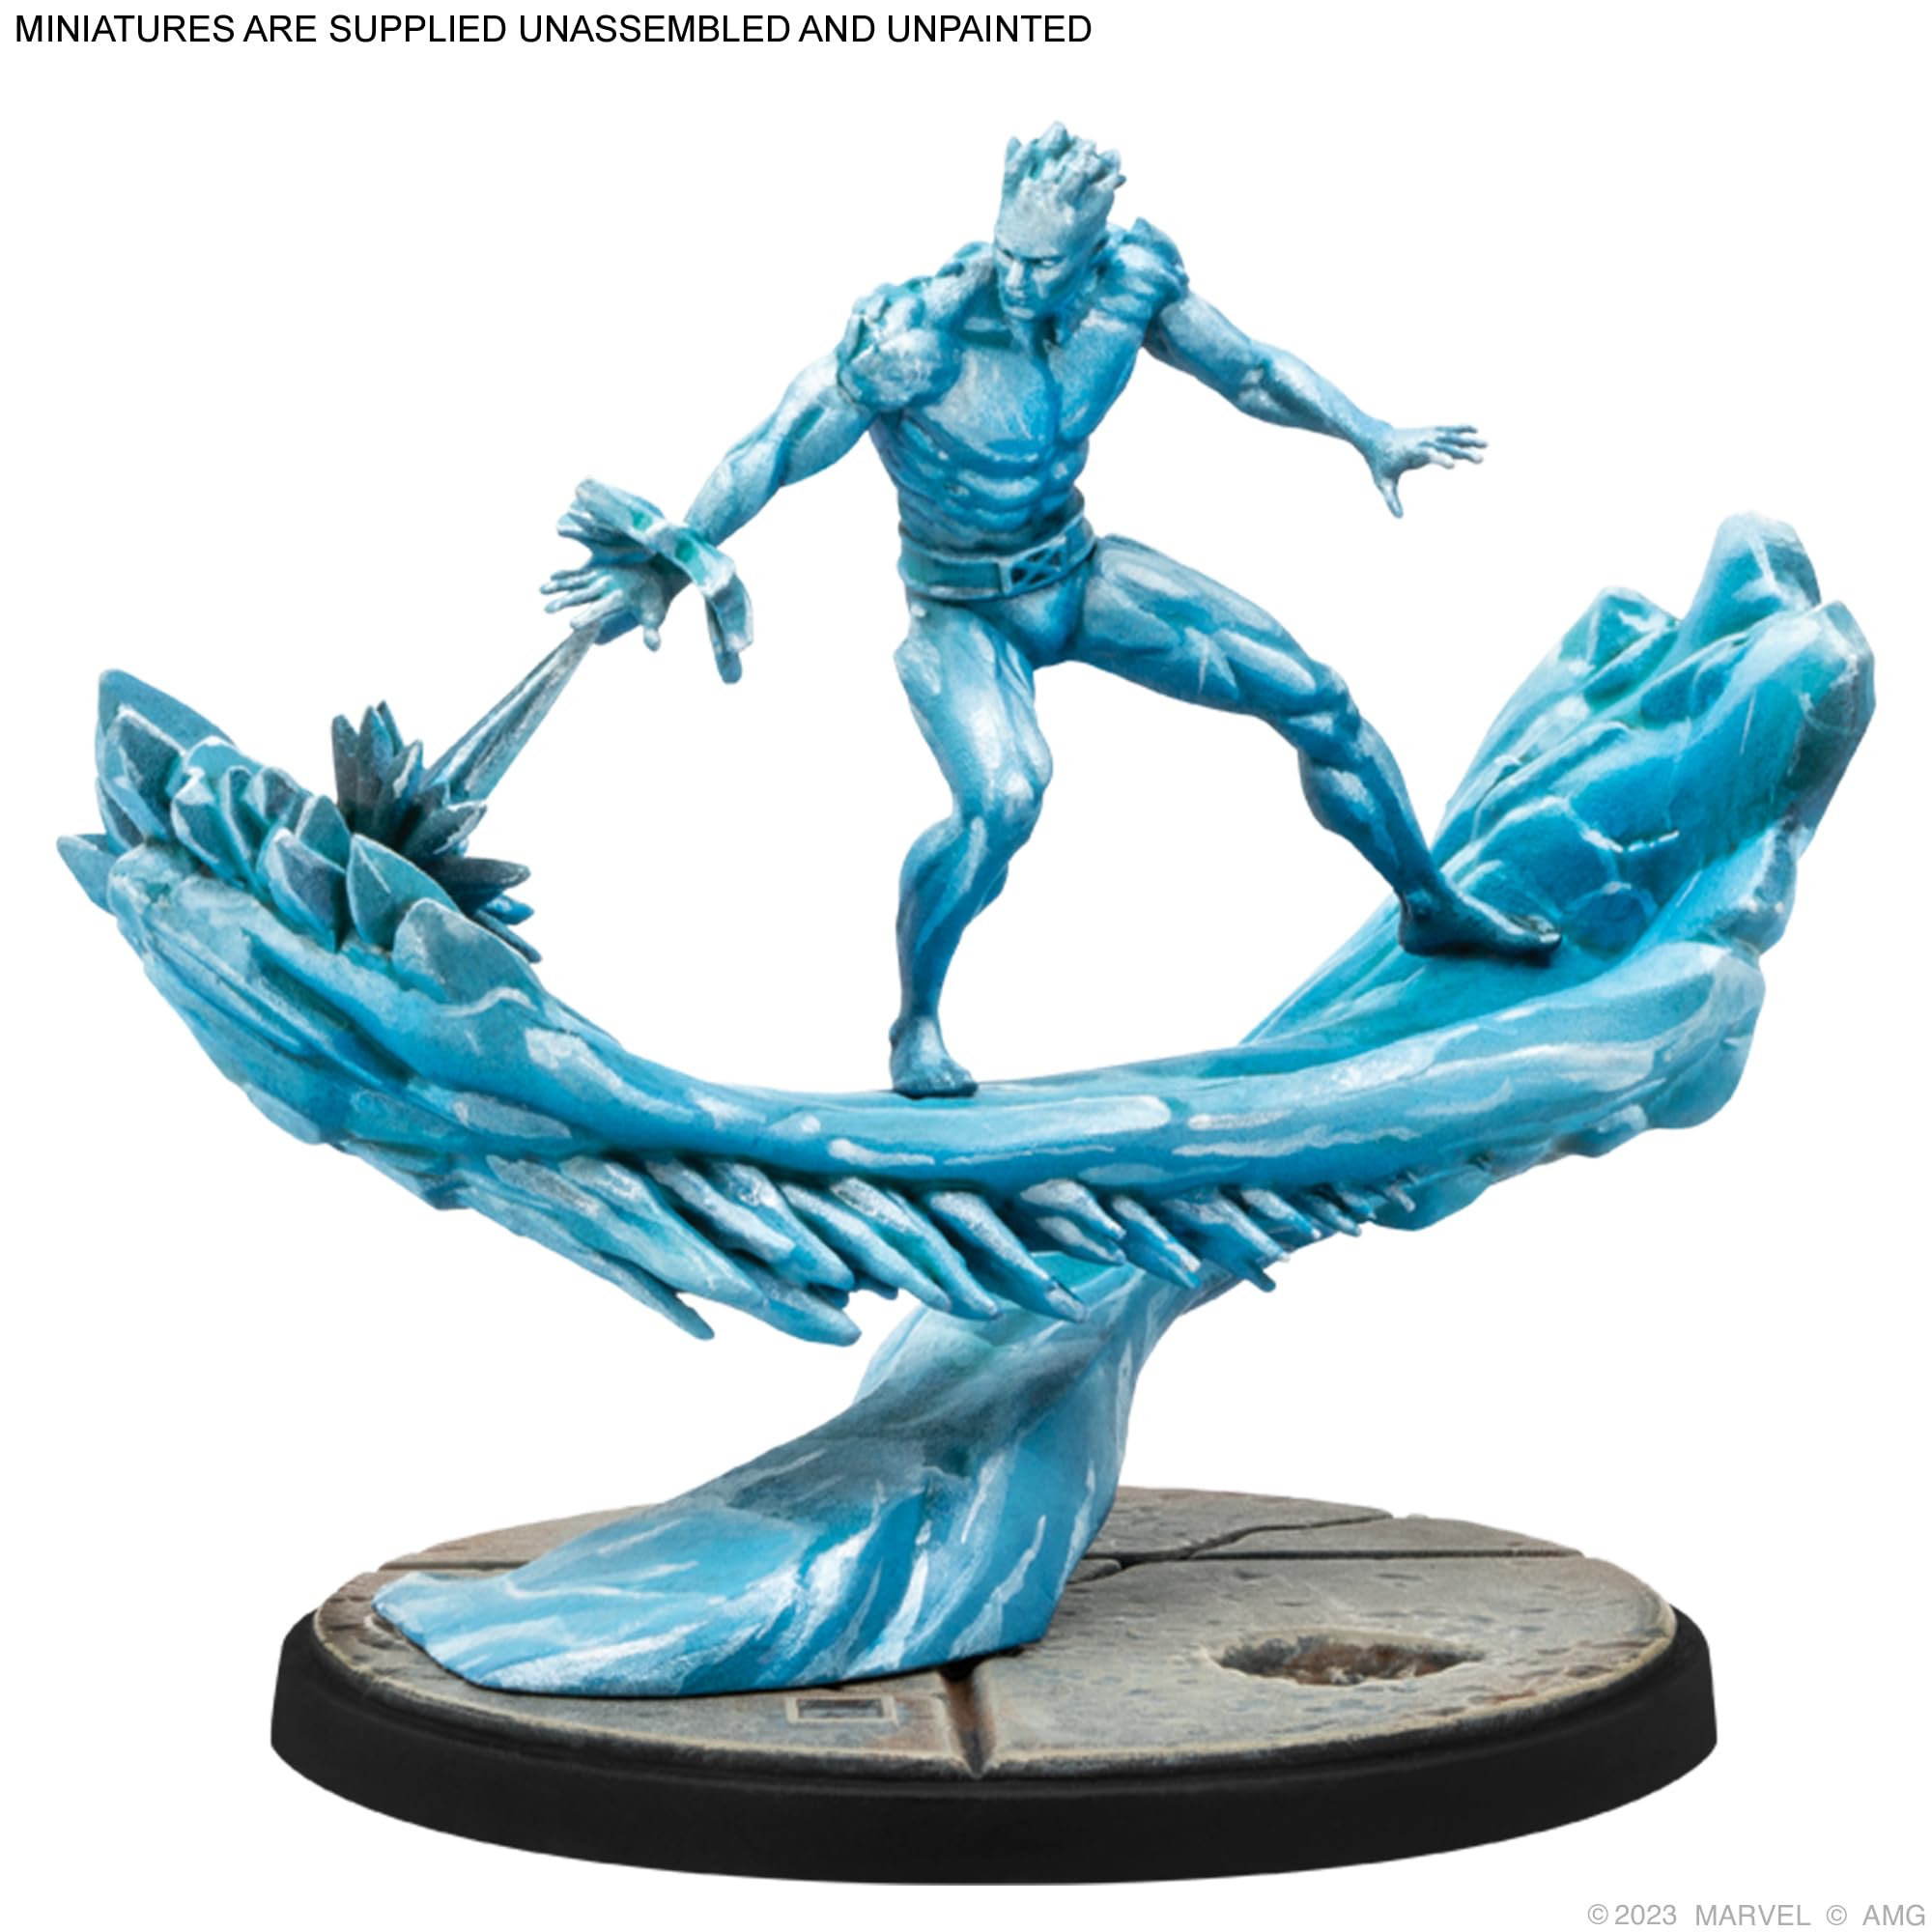 Marvel: Crisis Protocol Iceman & Shadowcat Character Pack - X-Men Miniatures with New Team Tactics! Tabletop Superhero Game, Ages 14+, 2 Players, 90 Minute Playtime, Made by Atomic Mass Games